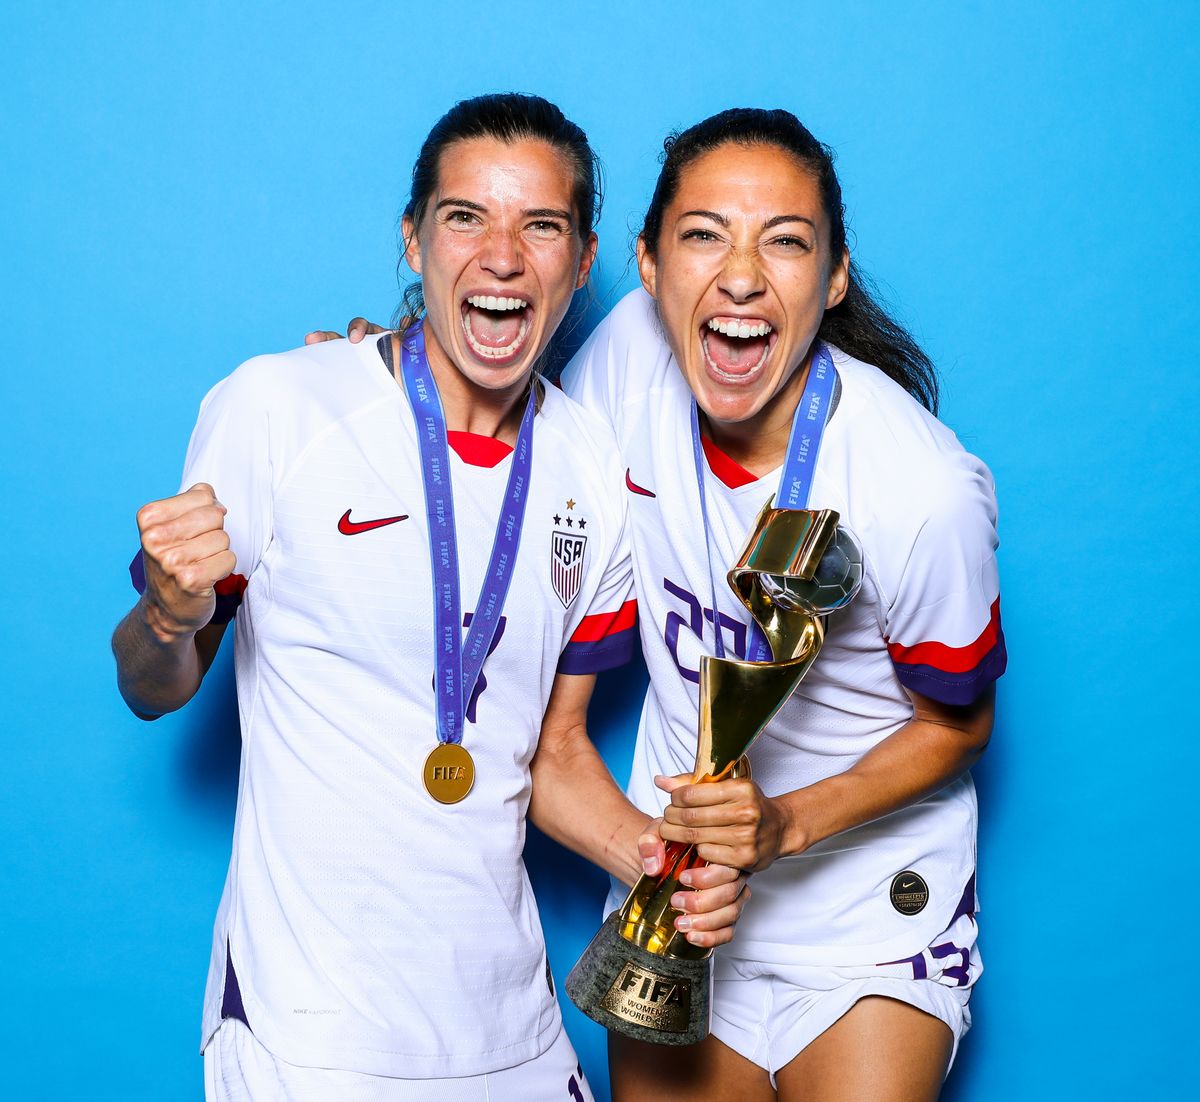 The couple posed with the Women's World Cup trophy after the 2019 FIFA Women's World Cup France Final match.